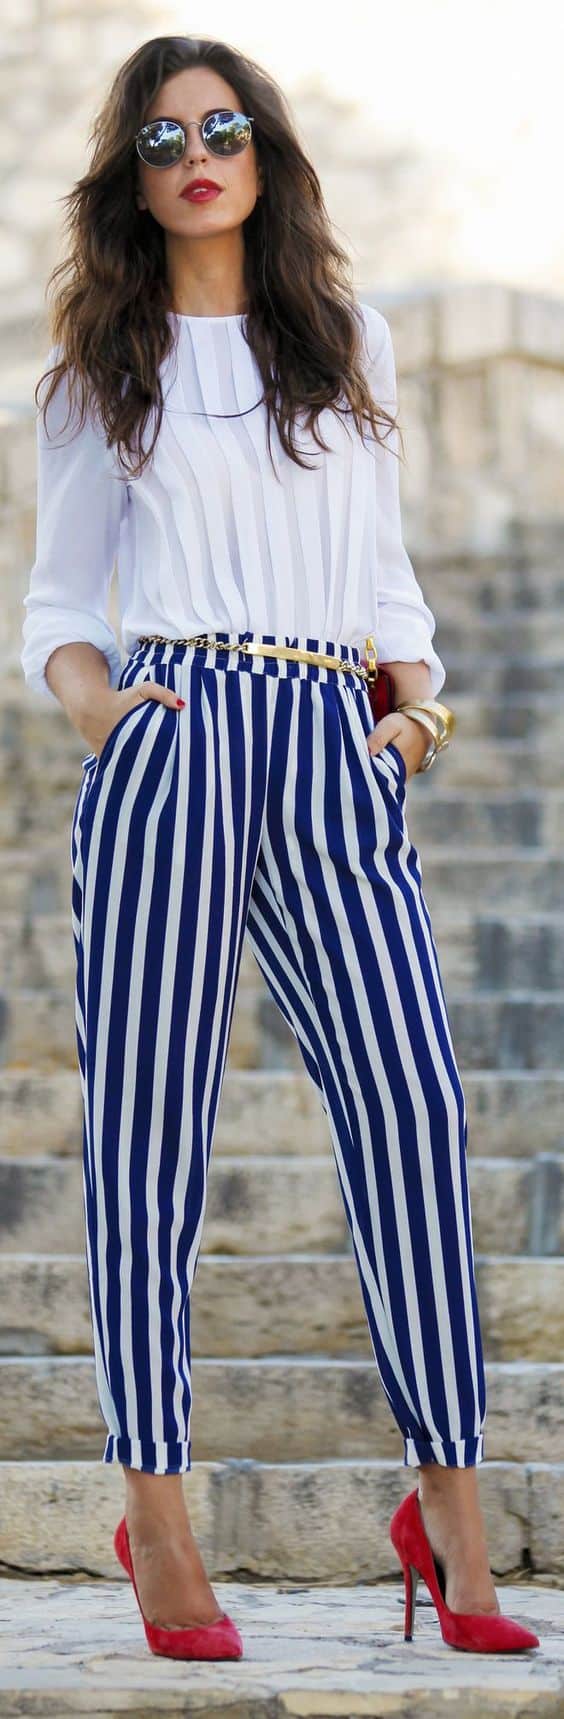 how to wear striped trousers with red heels